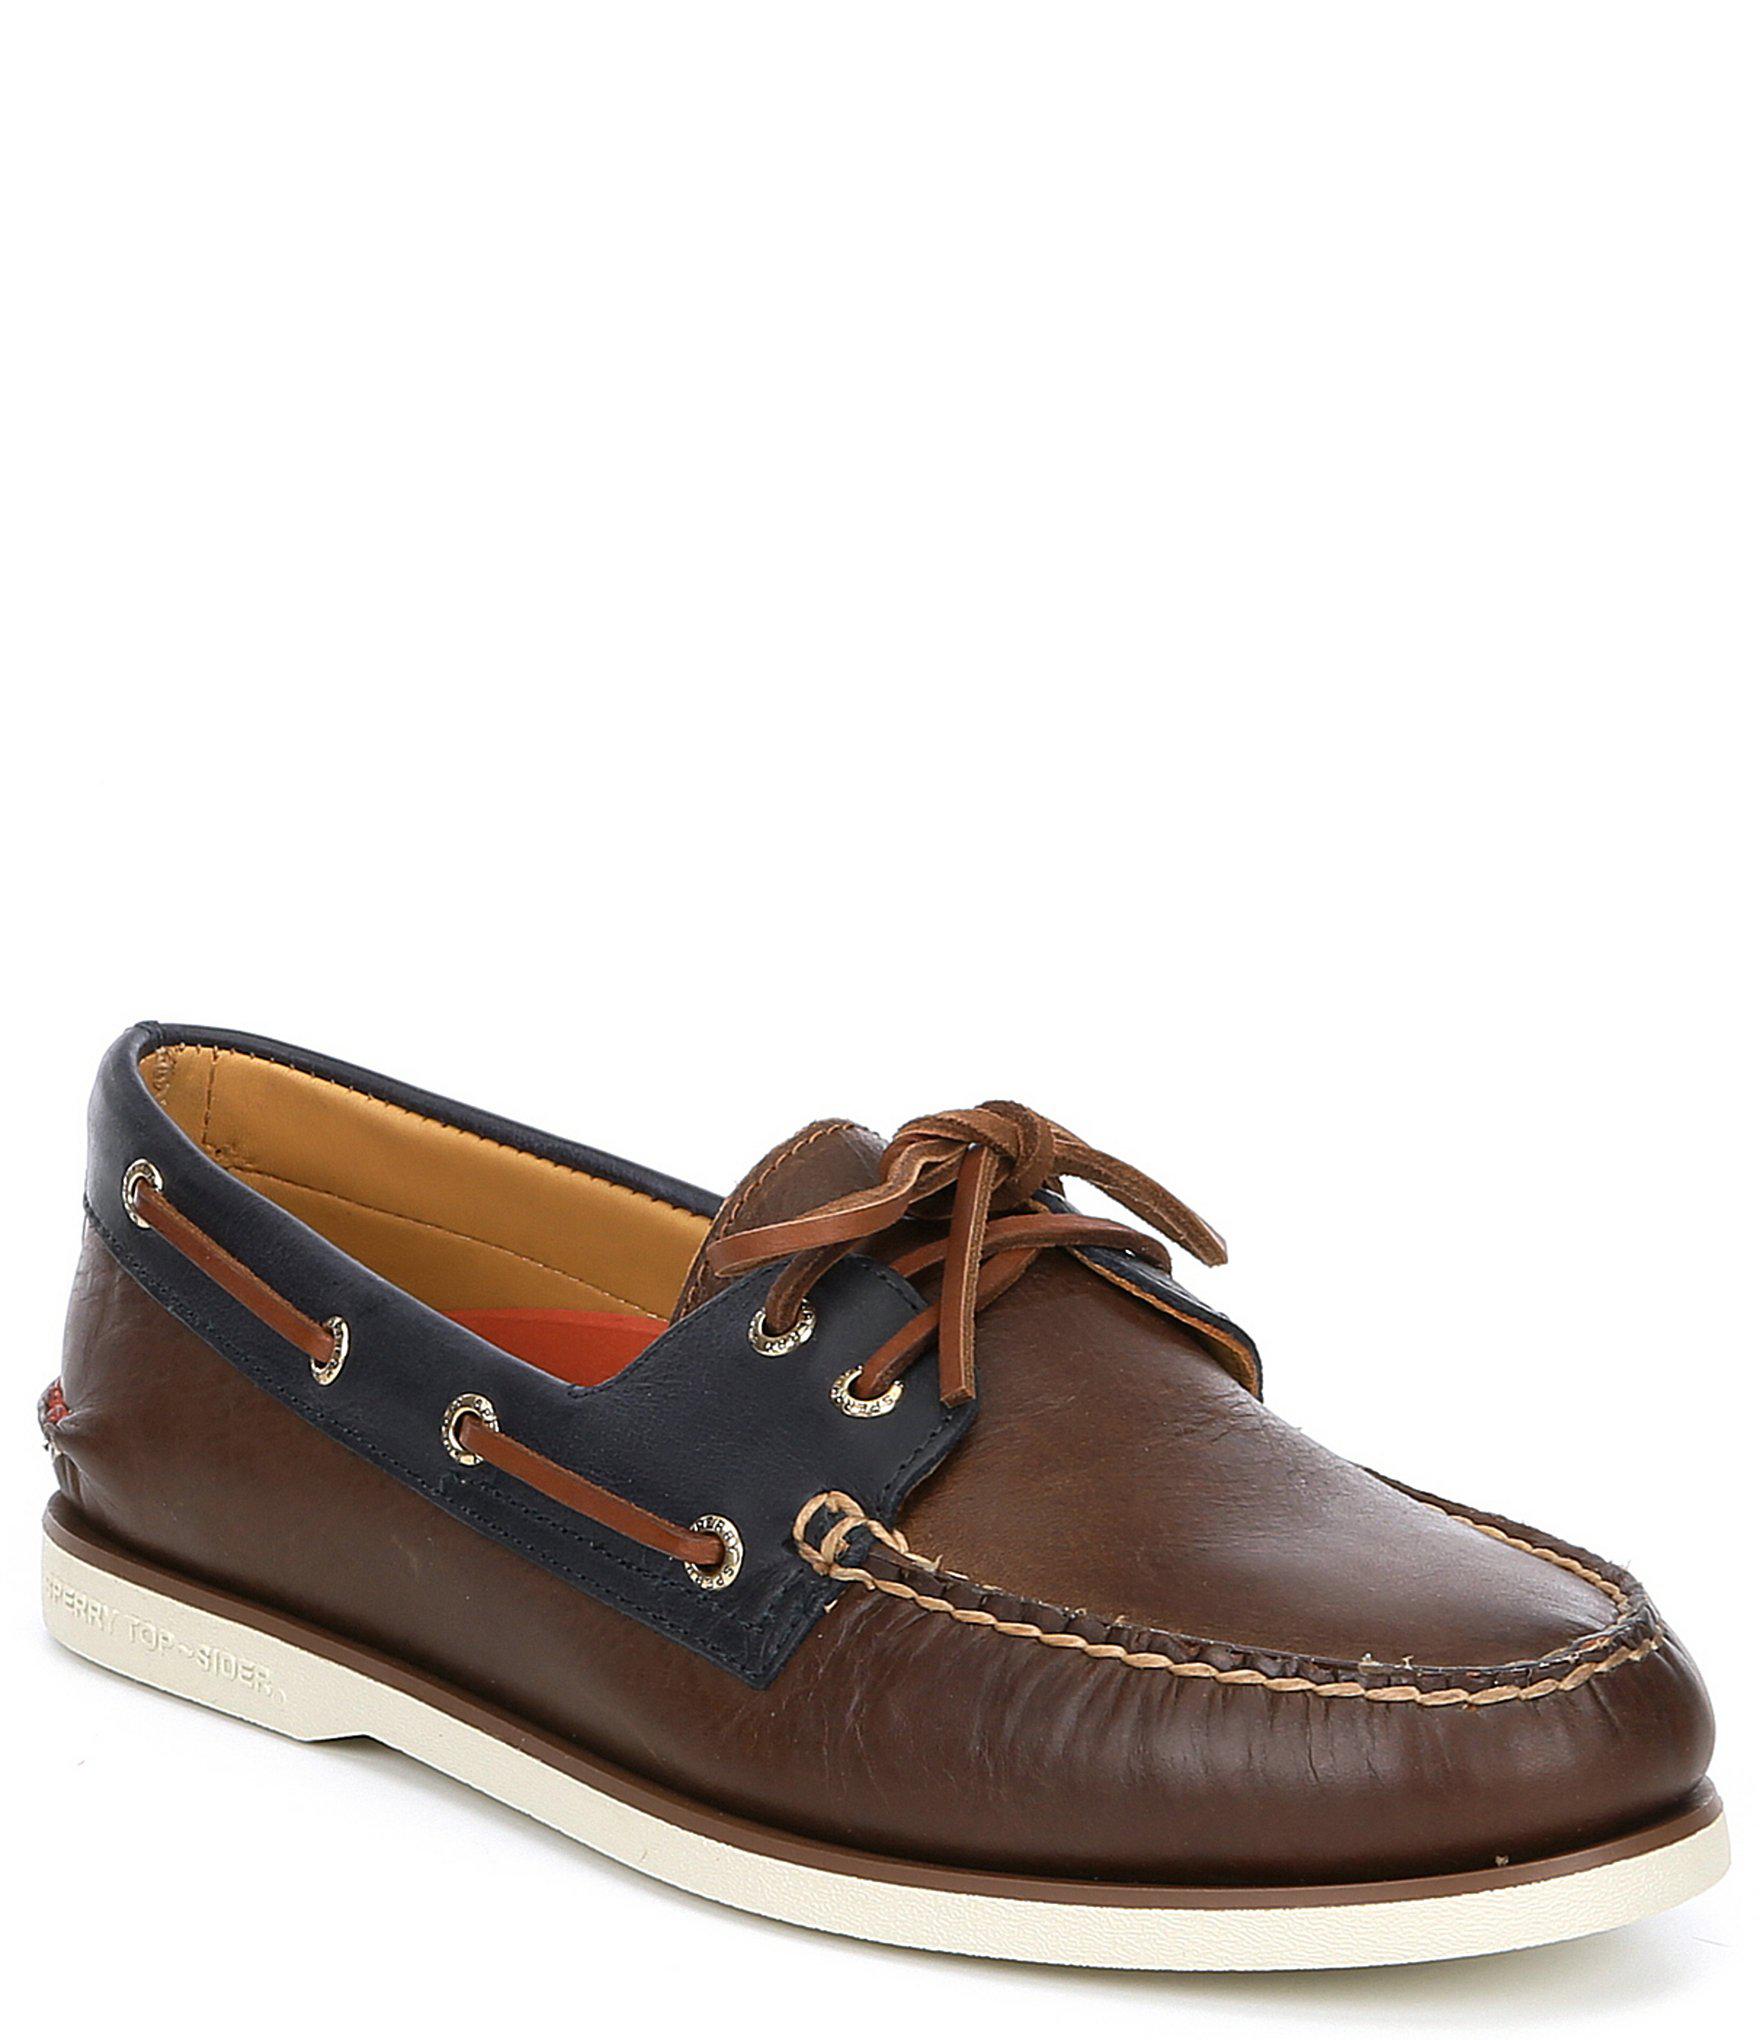 Sperry Top-Sider Leather Men's Gold Cup Authentic Original Two-eye ...